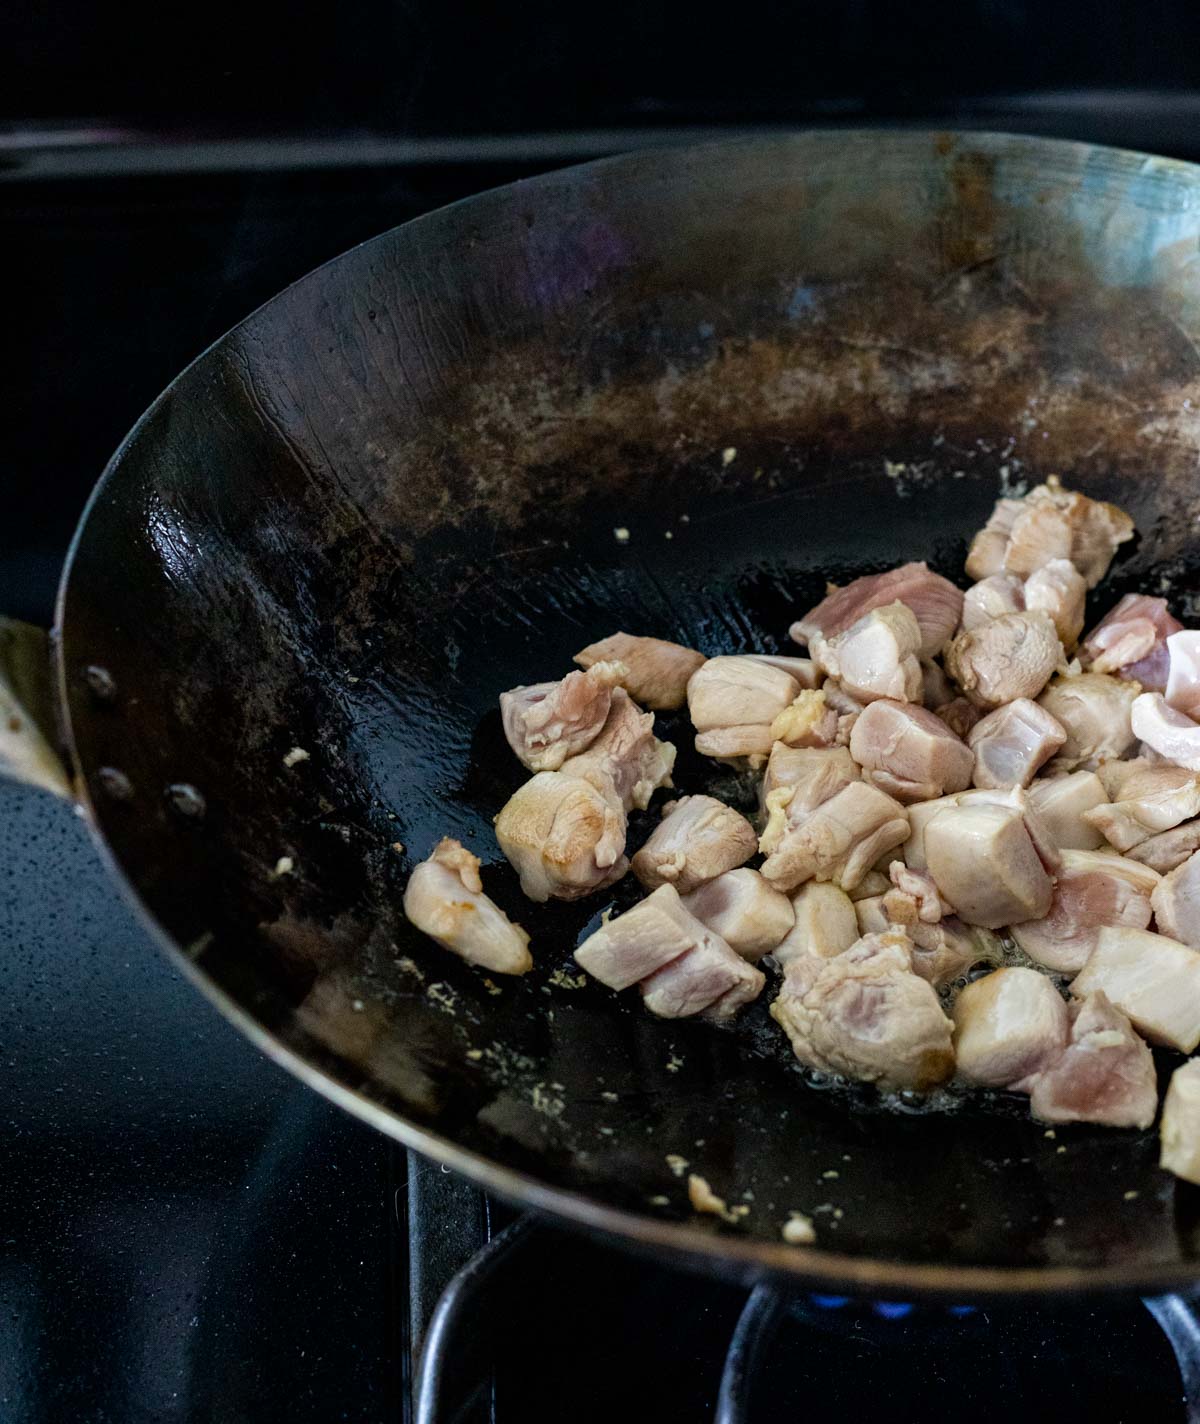 Chicken pieces cooking in a wok on the stovetop.